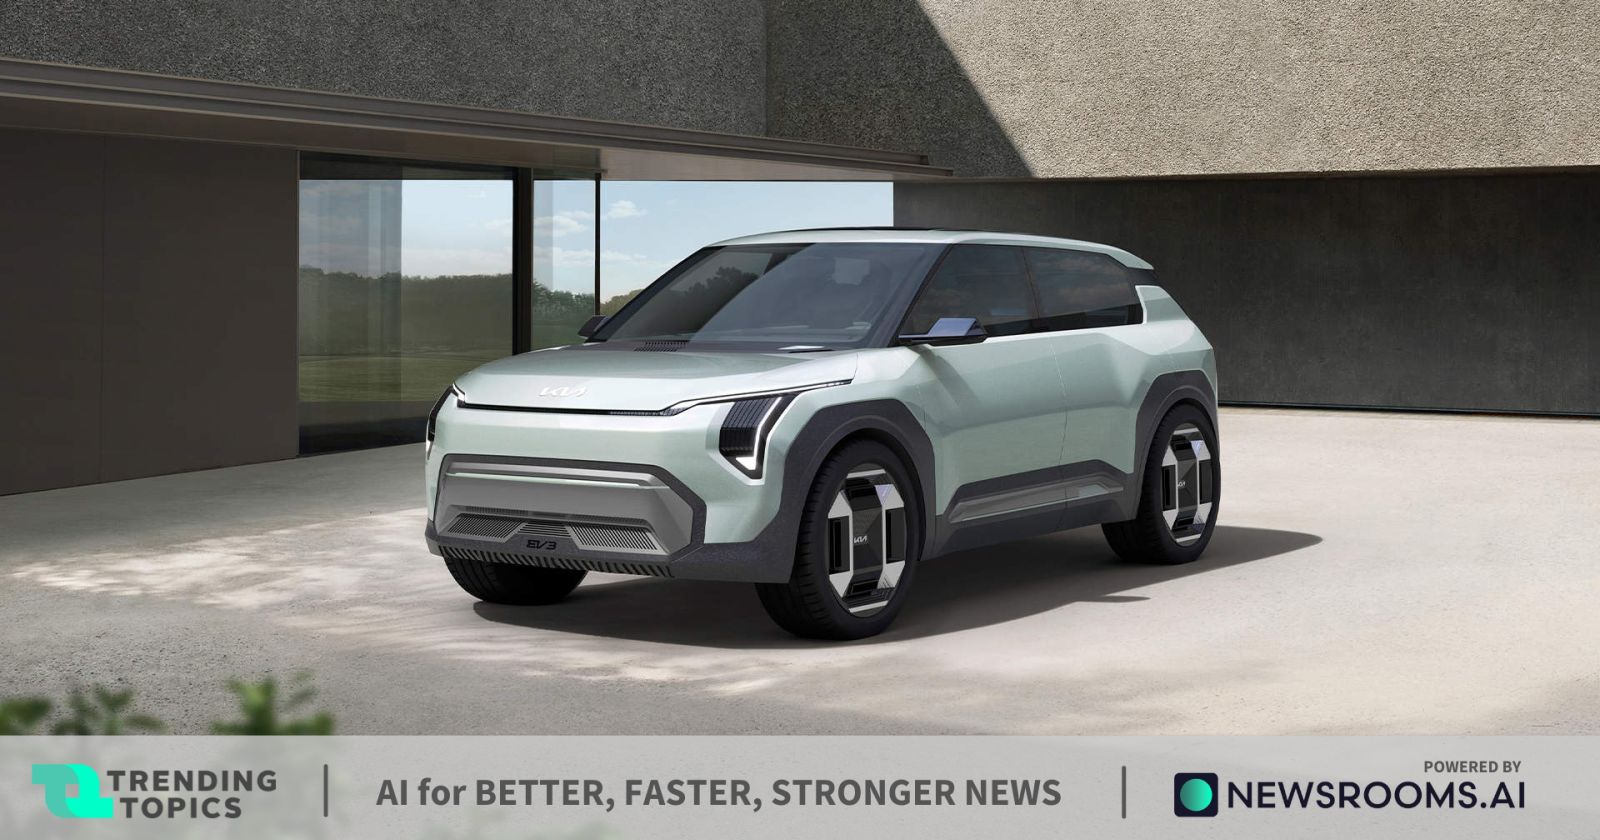 The launch of the electric SUV with a starting price of less than $30,000 is being prepared